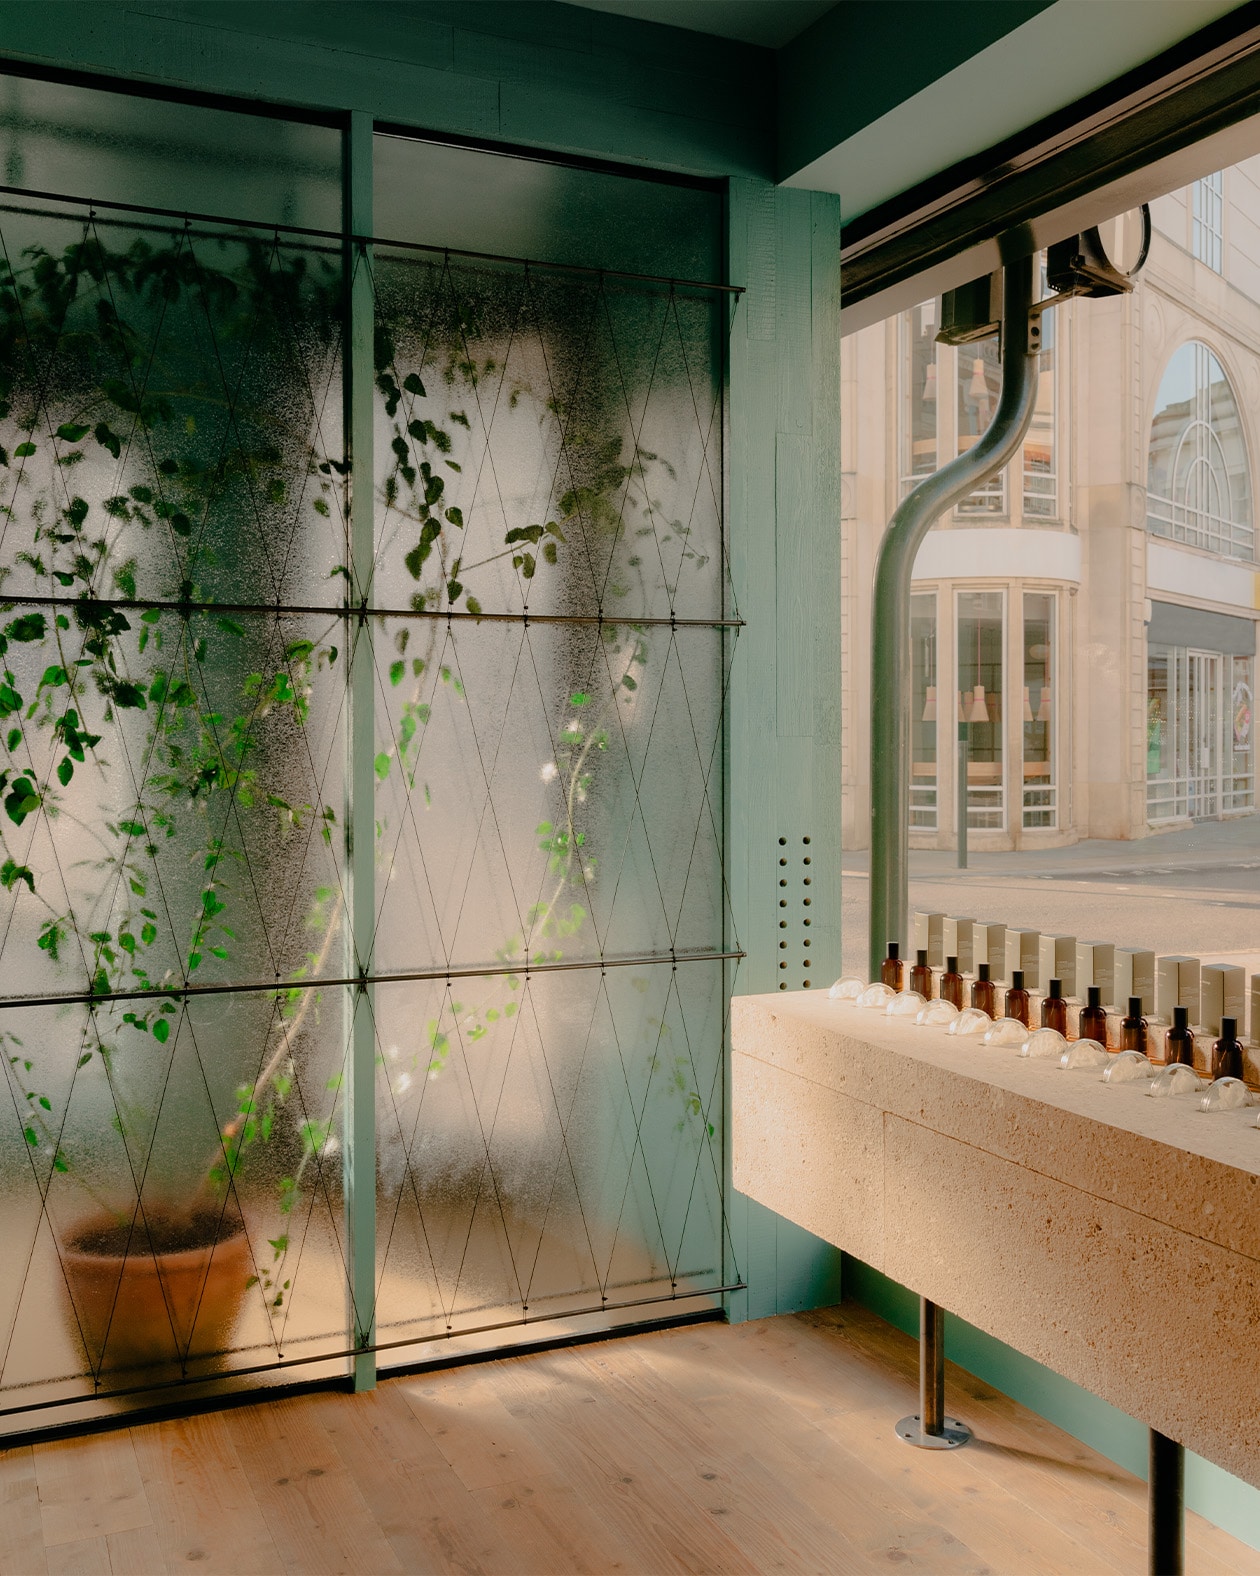 Aesop Richmond store interior window display and plant feature.